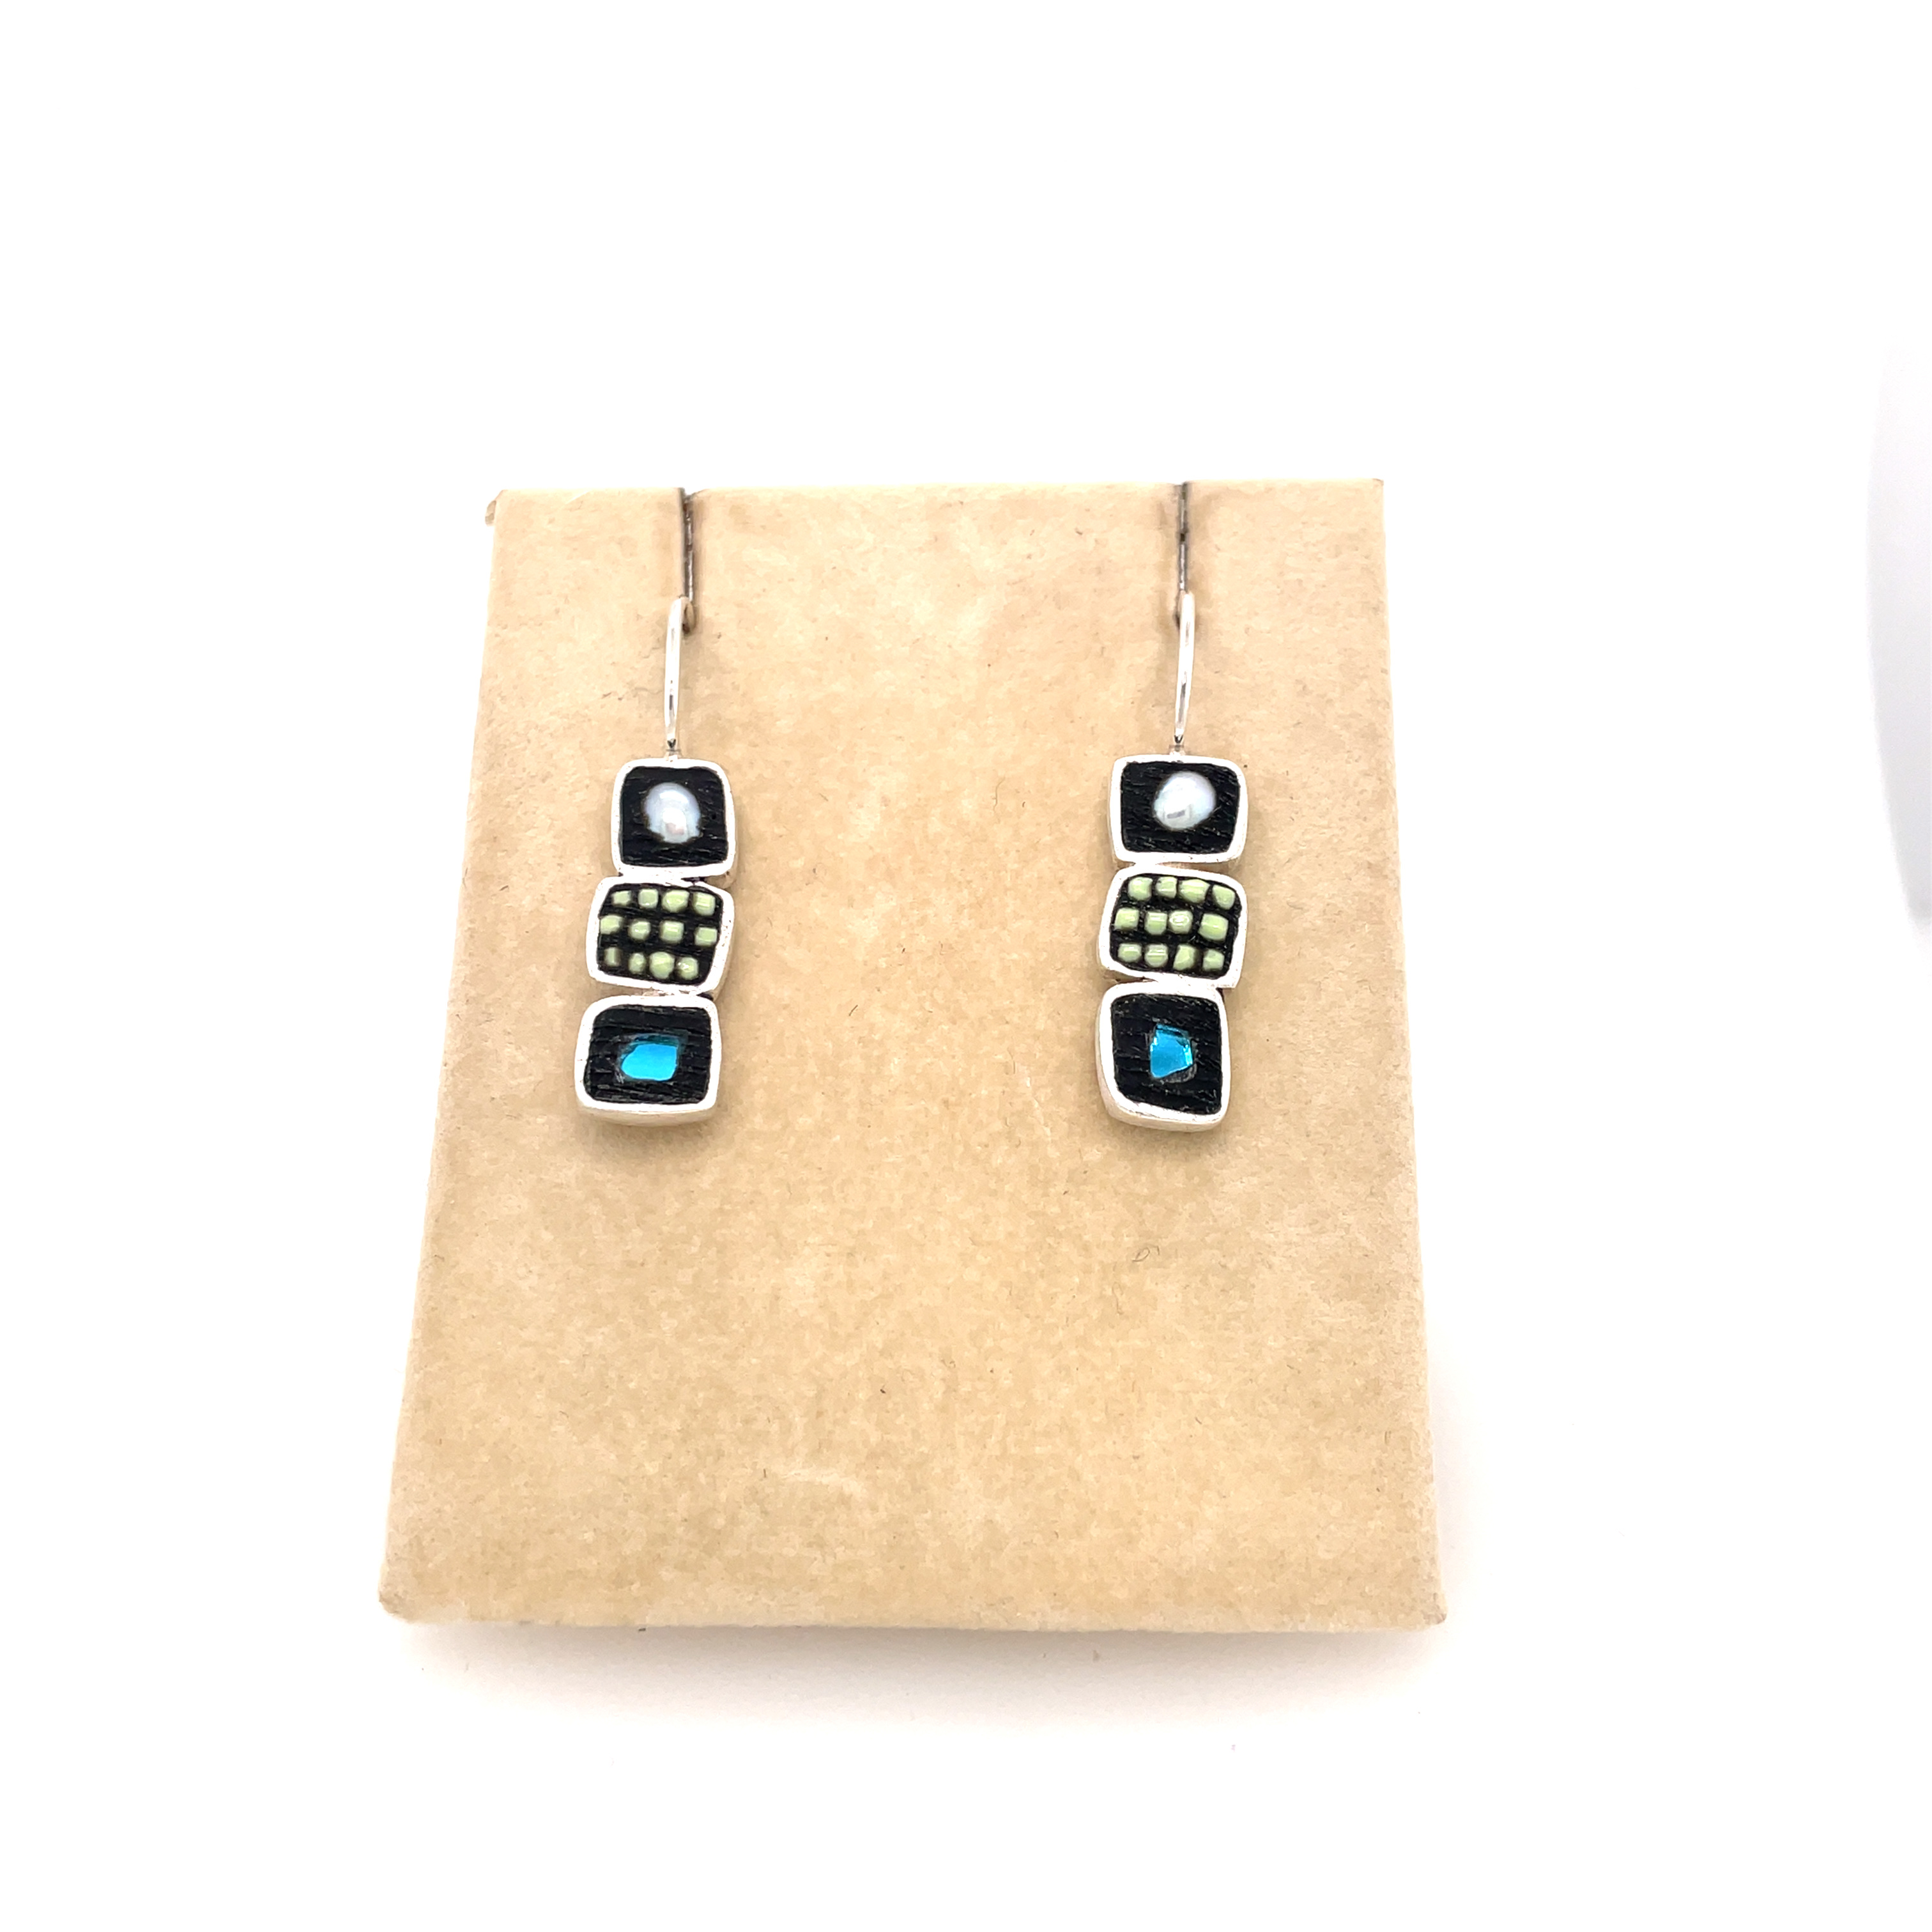 3 Square Earrings, Blue/Green and Pearl